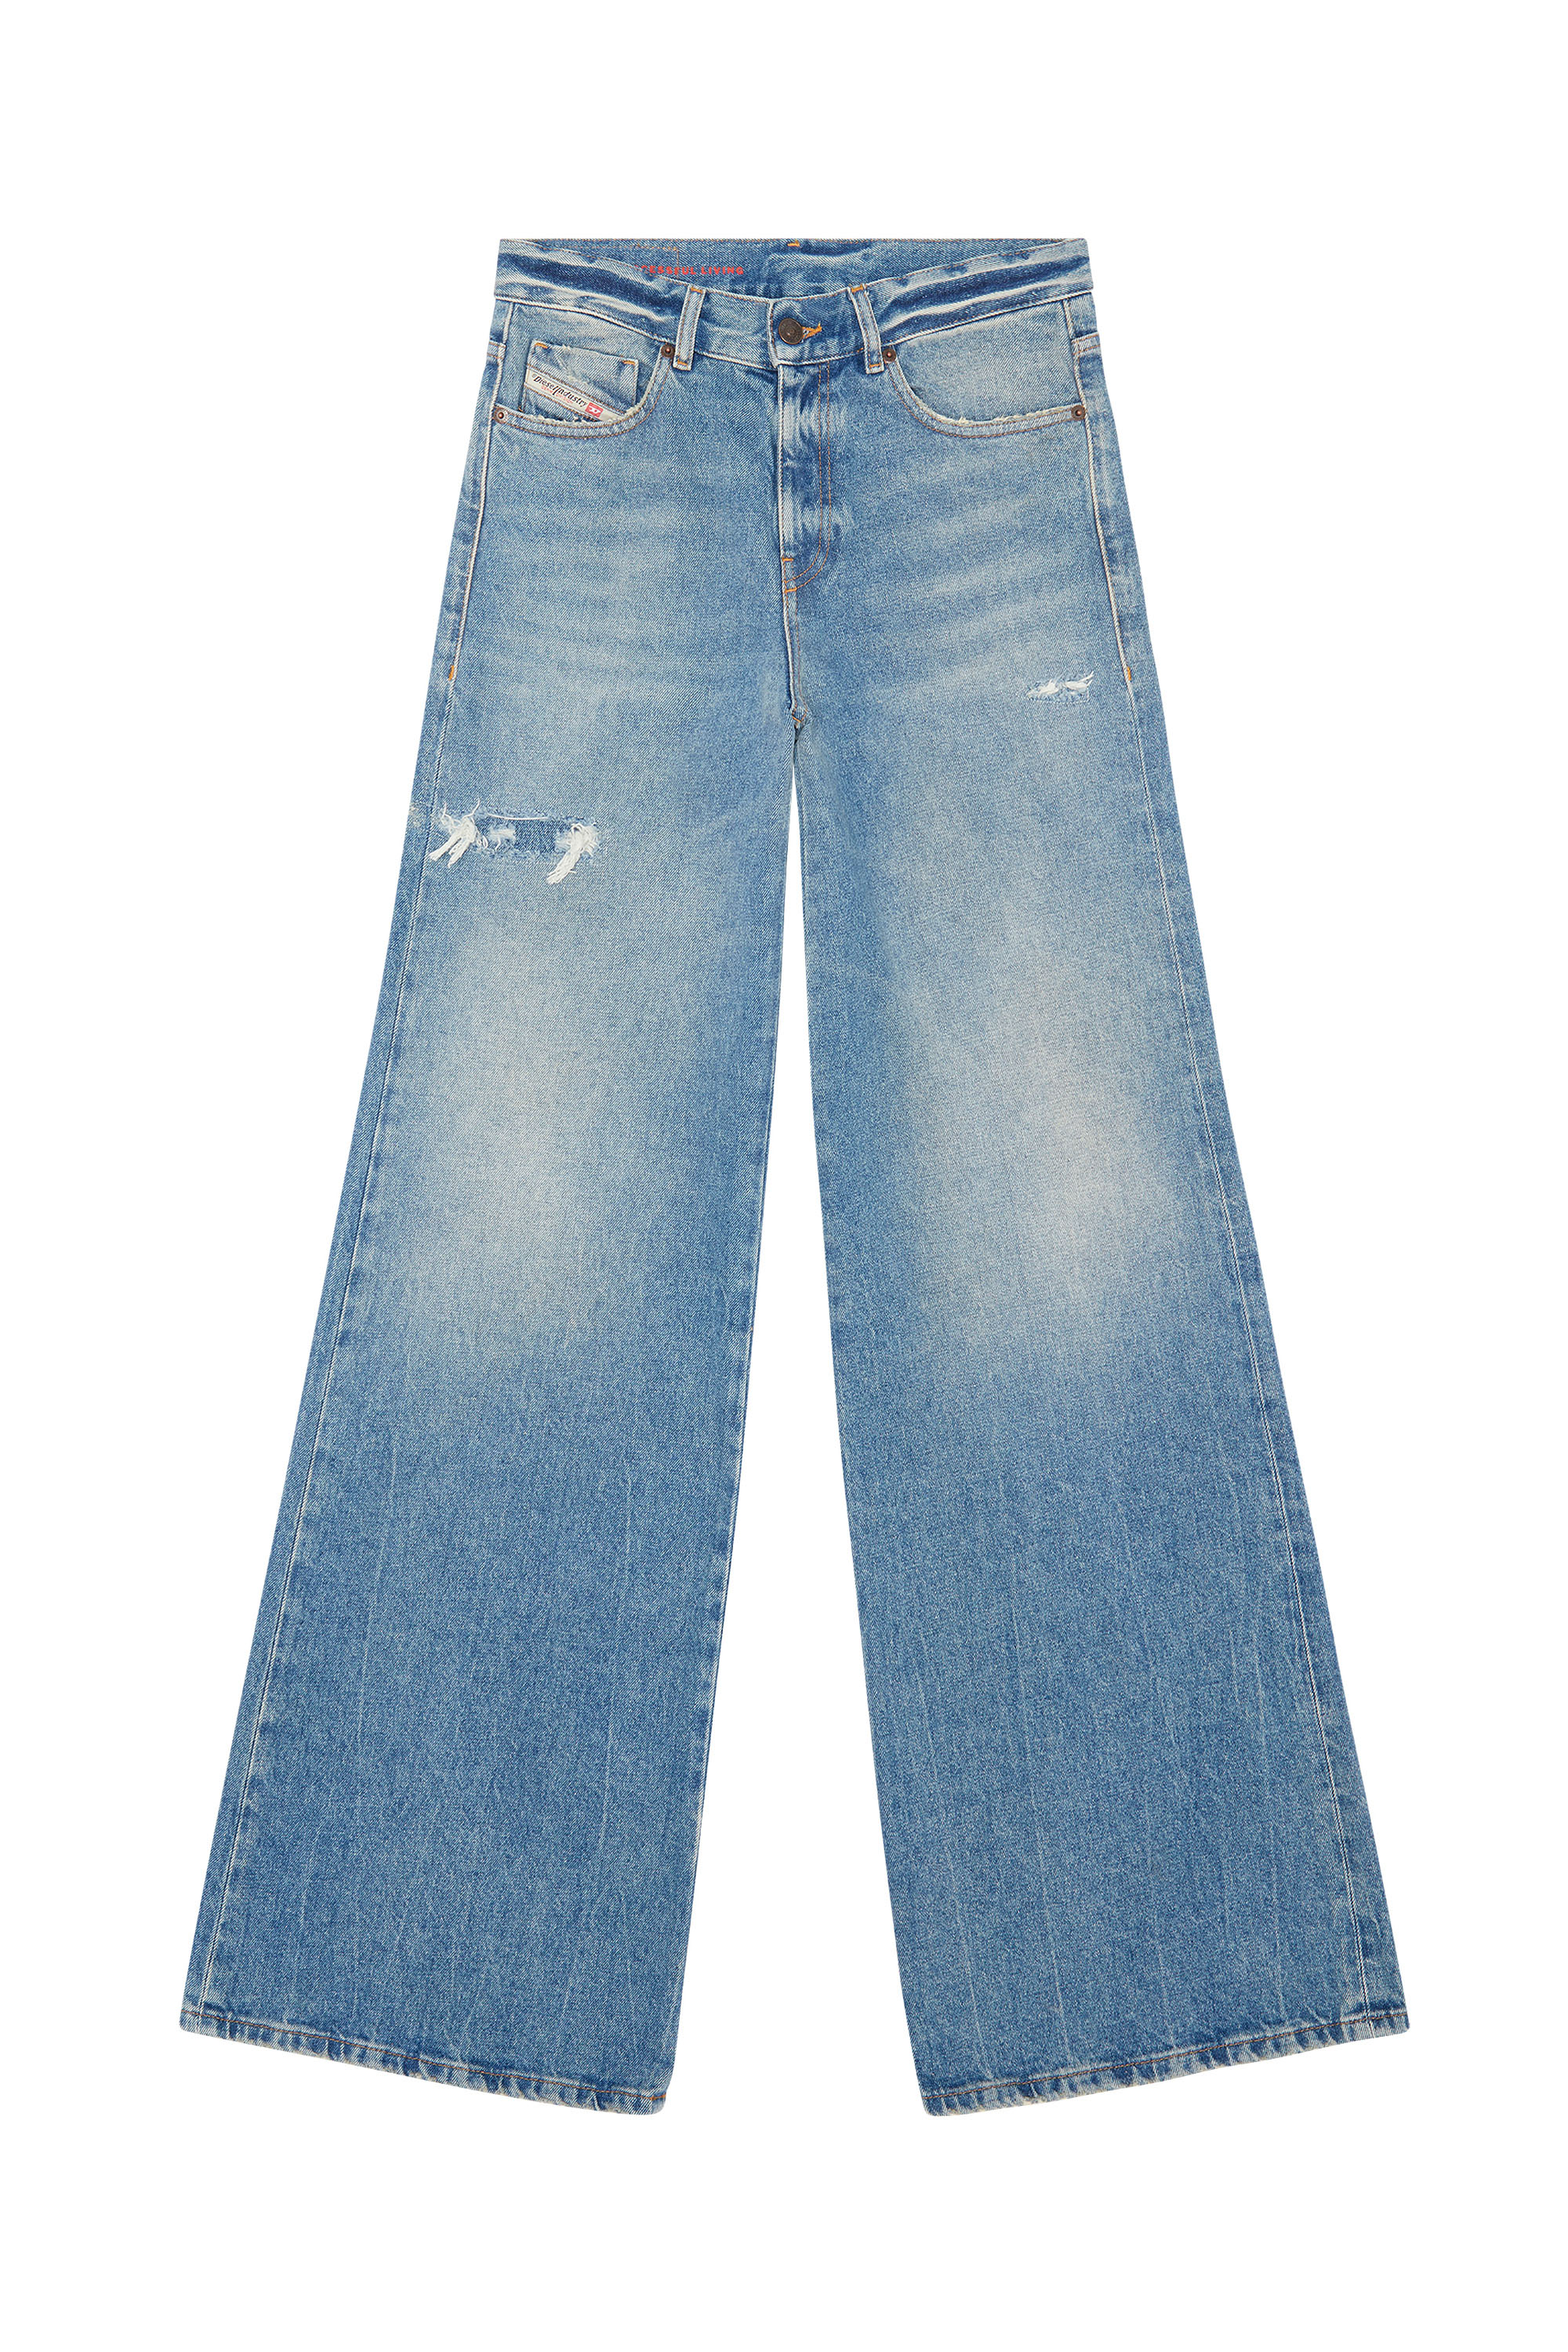 1978 09D97 Bootcut and Flare Jeans, Blu medio - Jeans